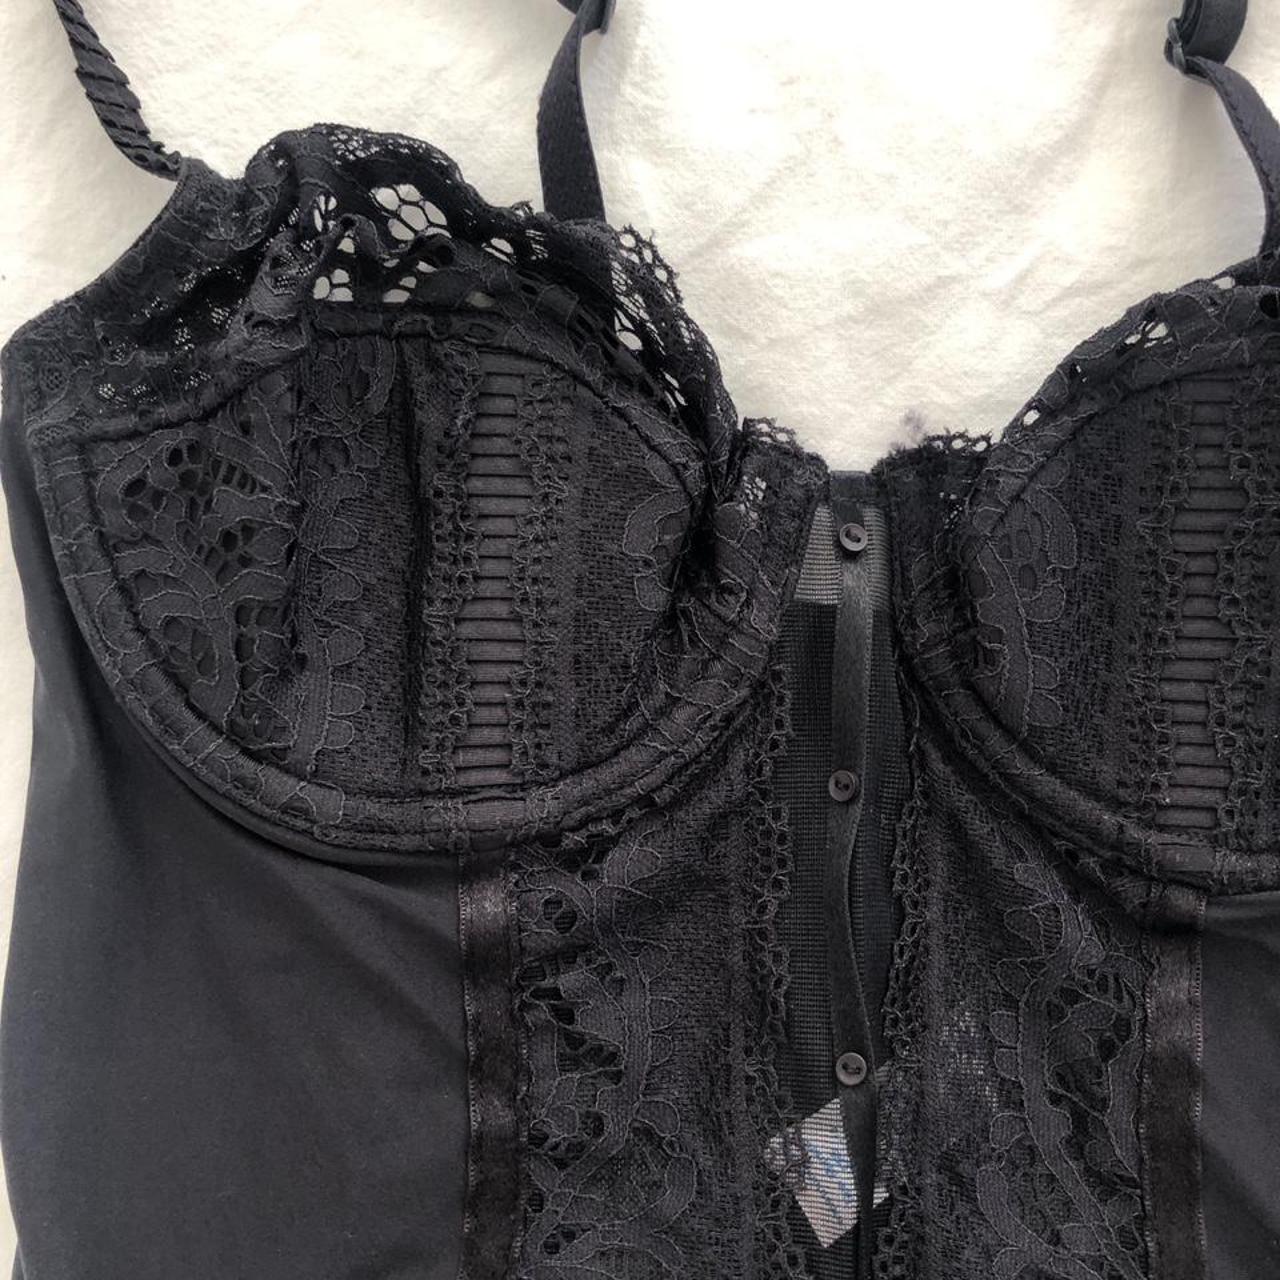 Product Image 3 - Sexy vintage 90s black lace